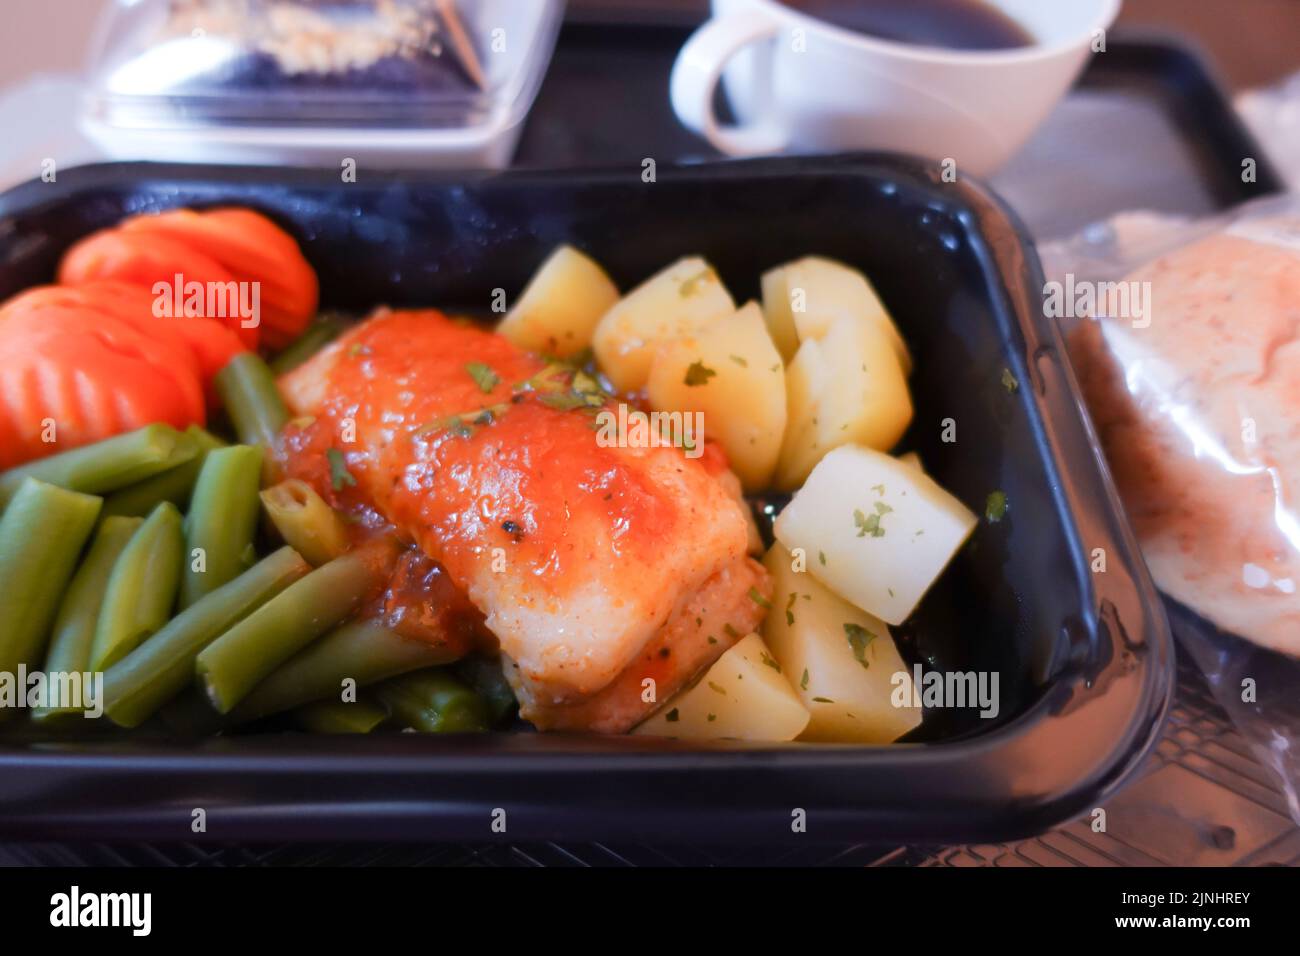 Close up of Tray of food on the plane. Stock Photo